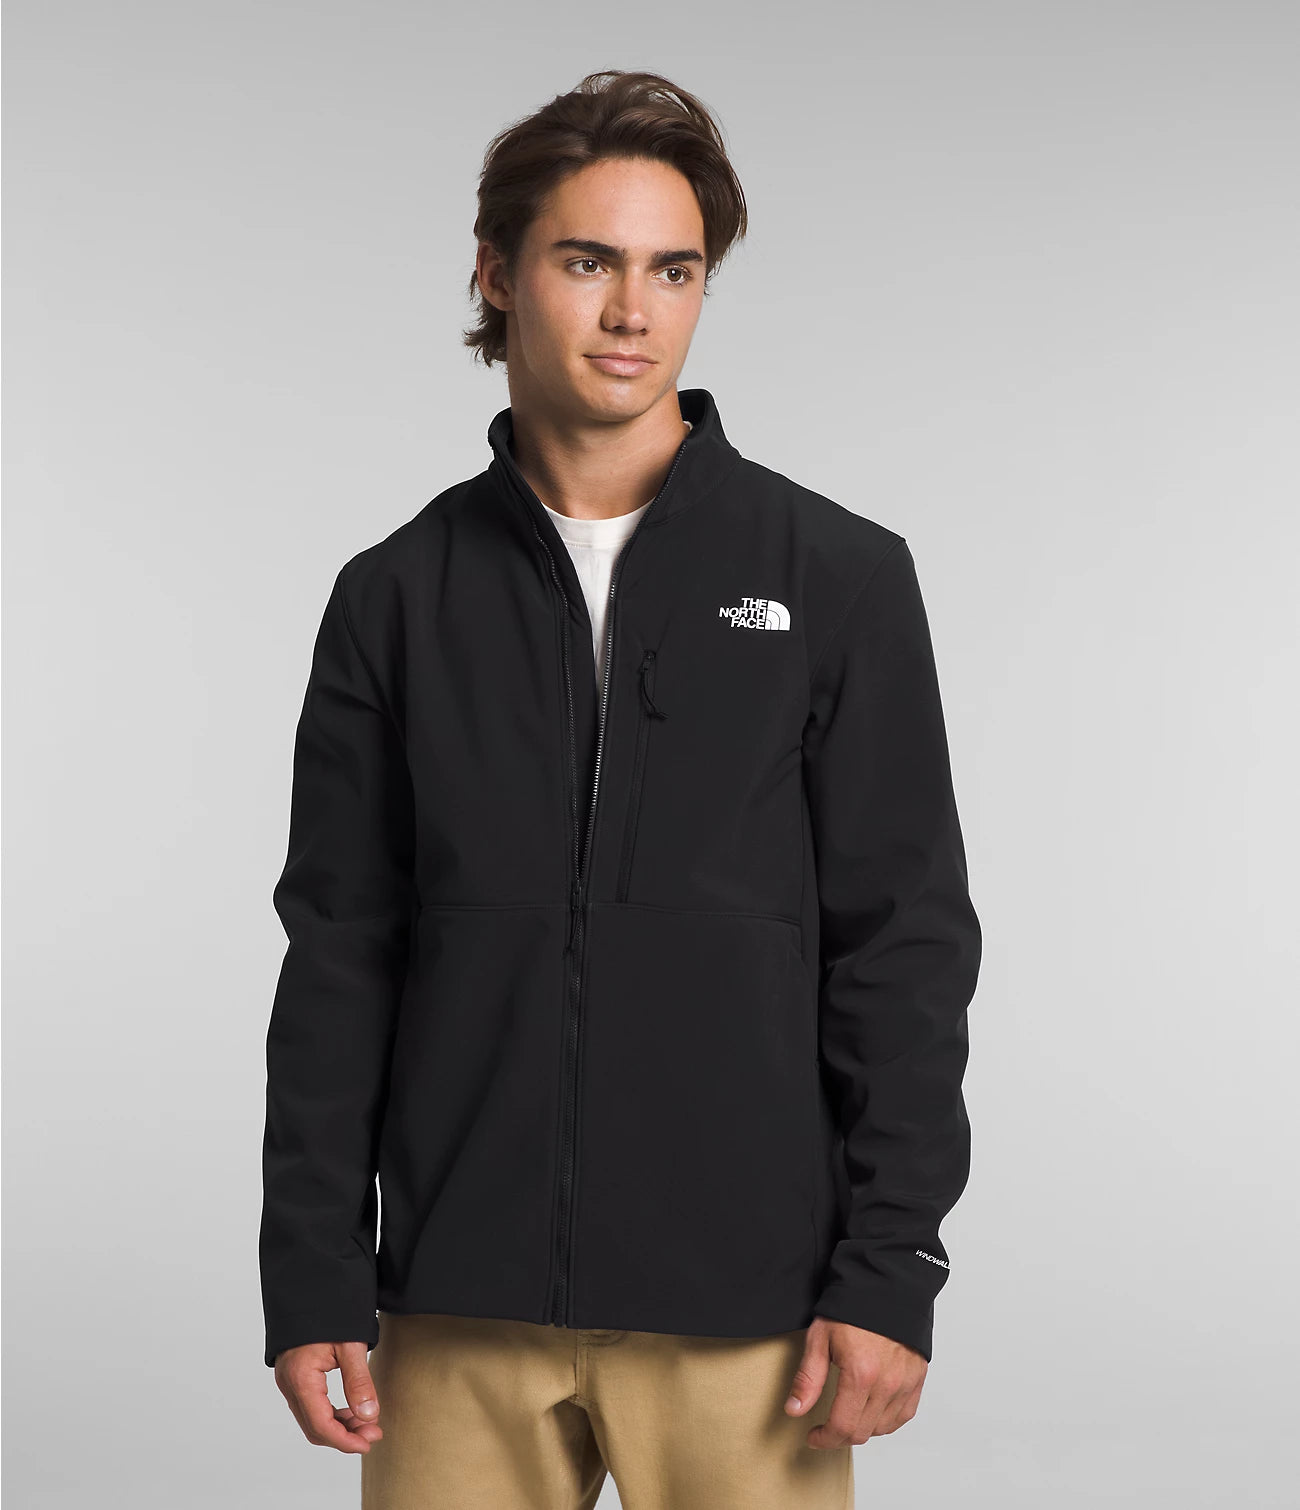 The North Face – Doug's Hood River